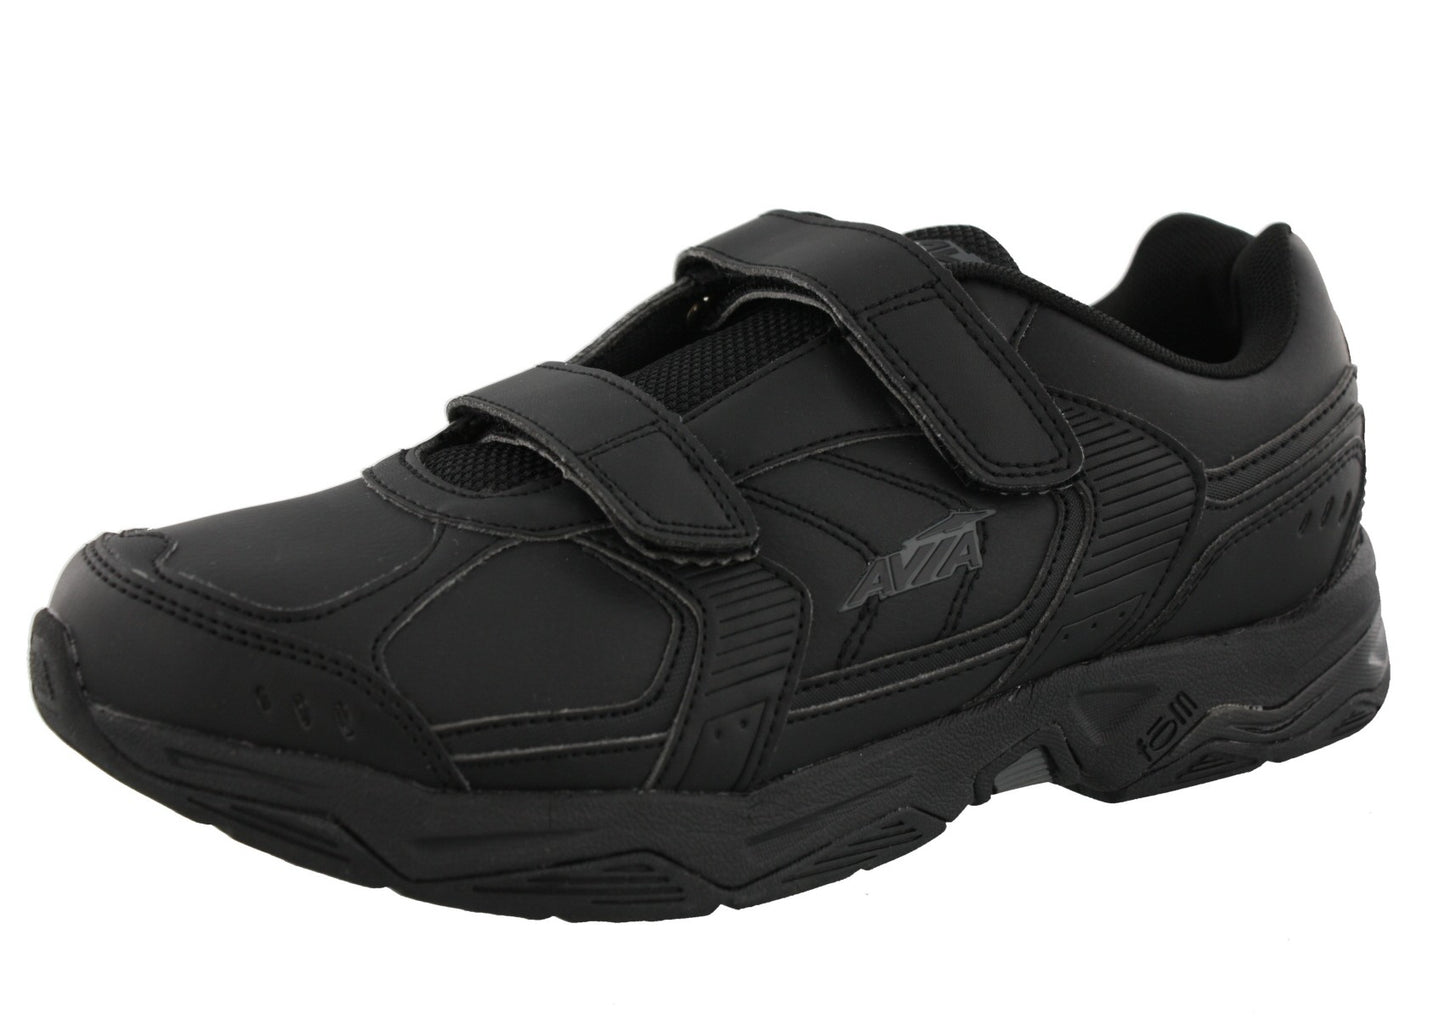 Avia Canyon Men's Trail Shoes and Walking Sneakers